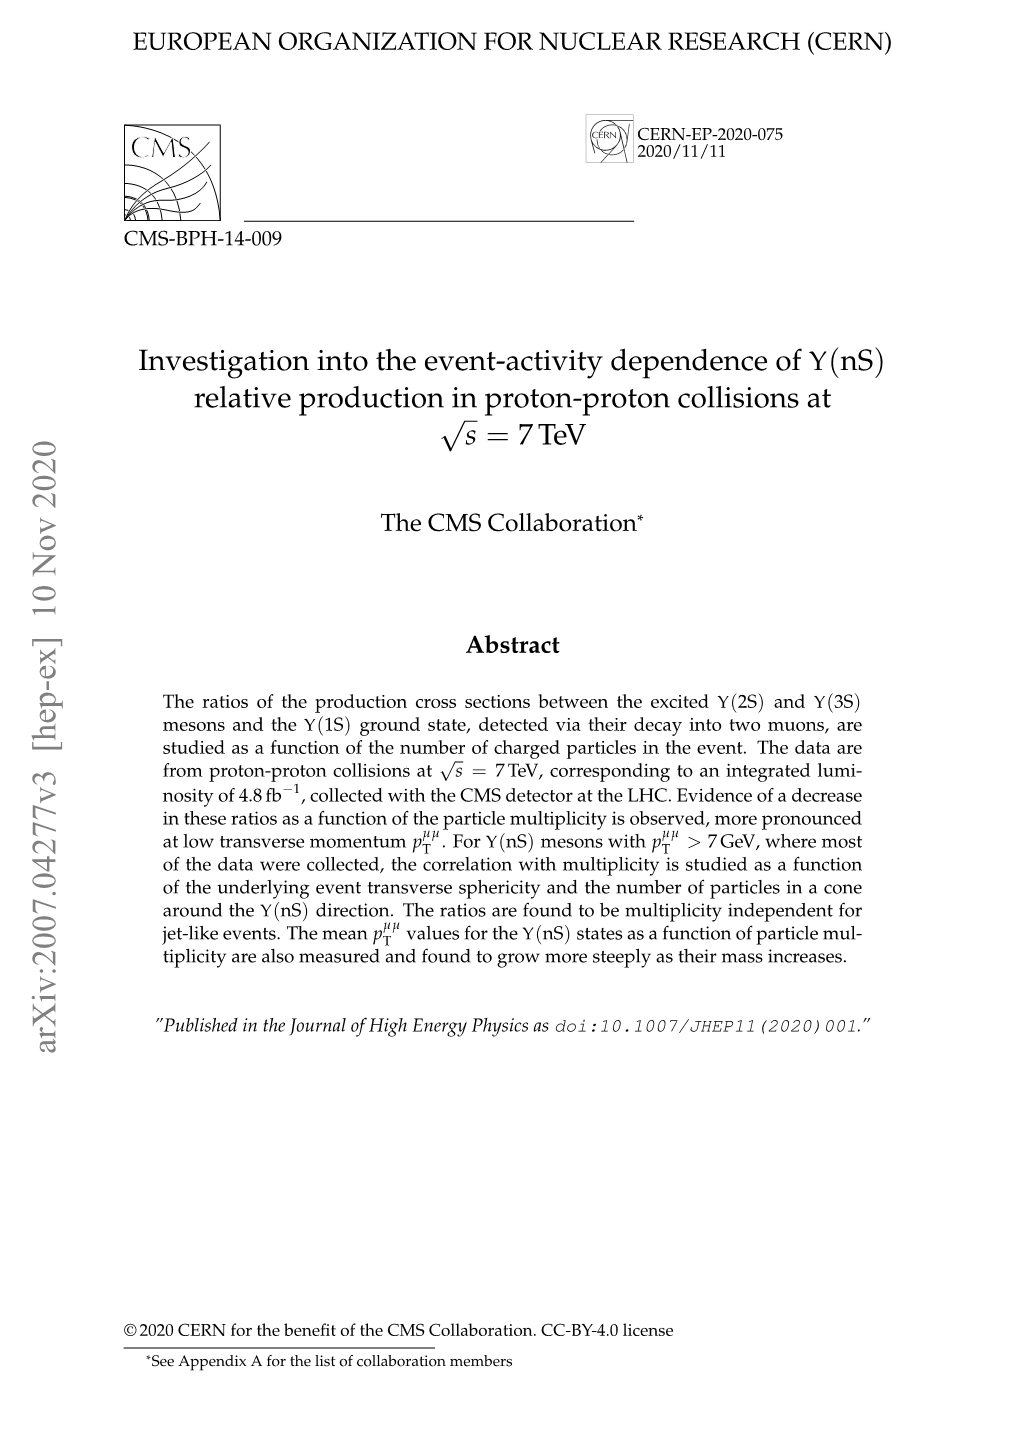 Relative Production in Proton-Proton Collisions at Sqrt(S) = 7